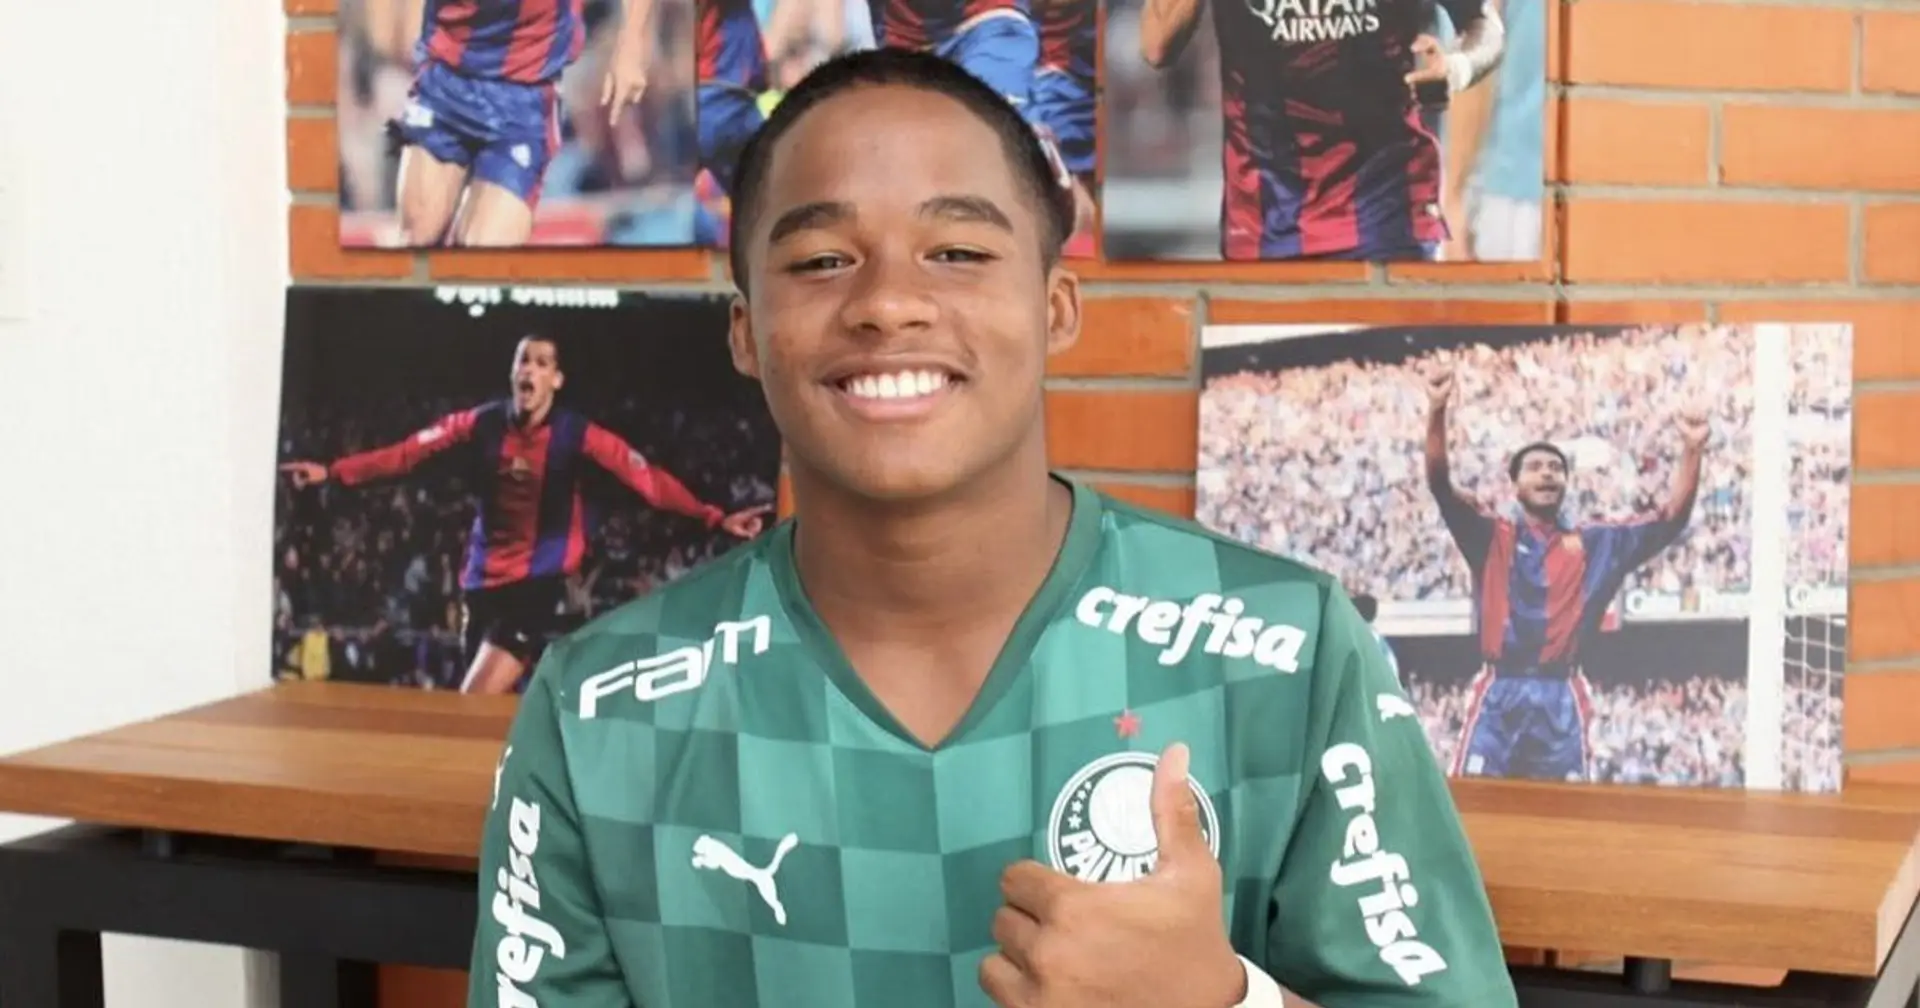 'All the boys in Brazil want to play for Barca': 15-year-old Palmeiras wonderkid Endrick